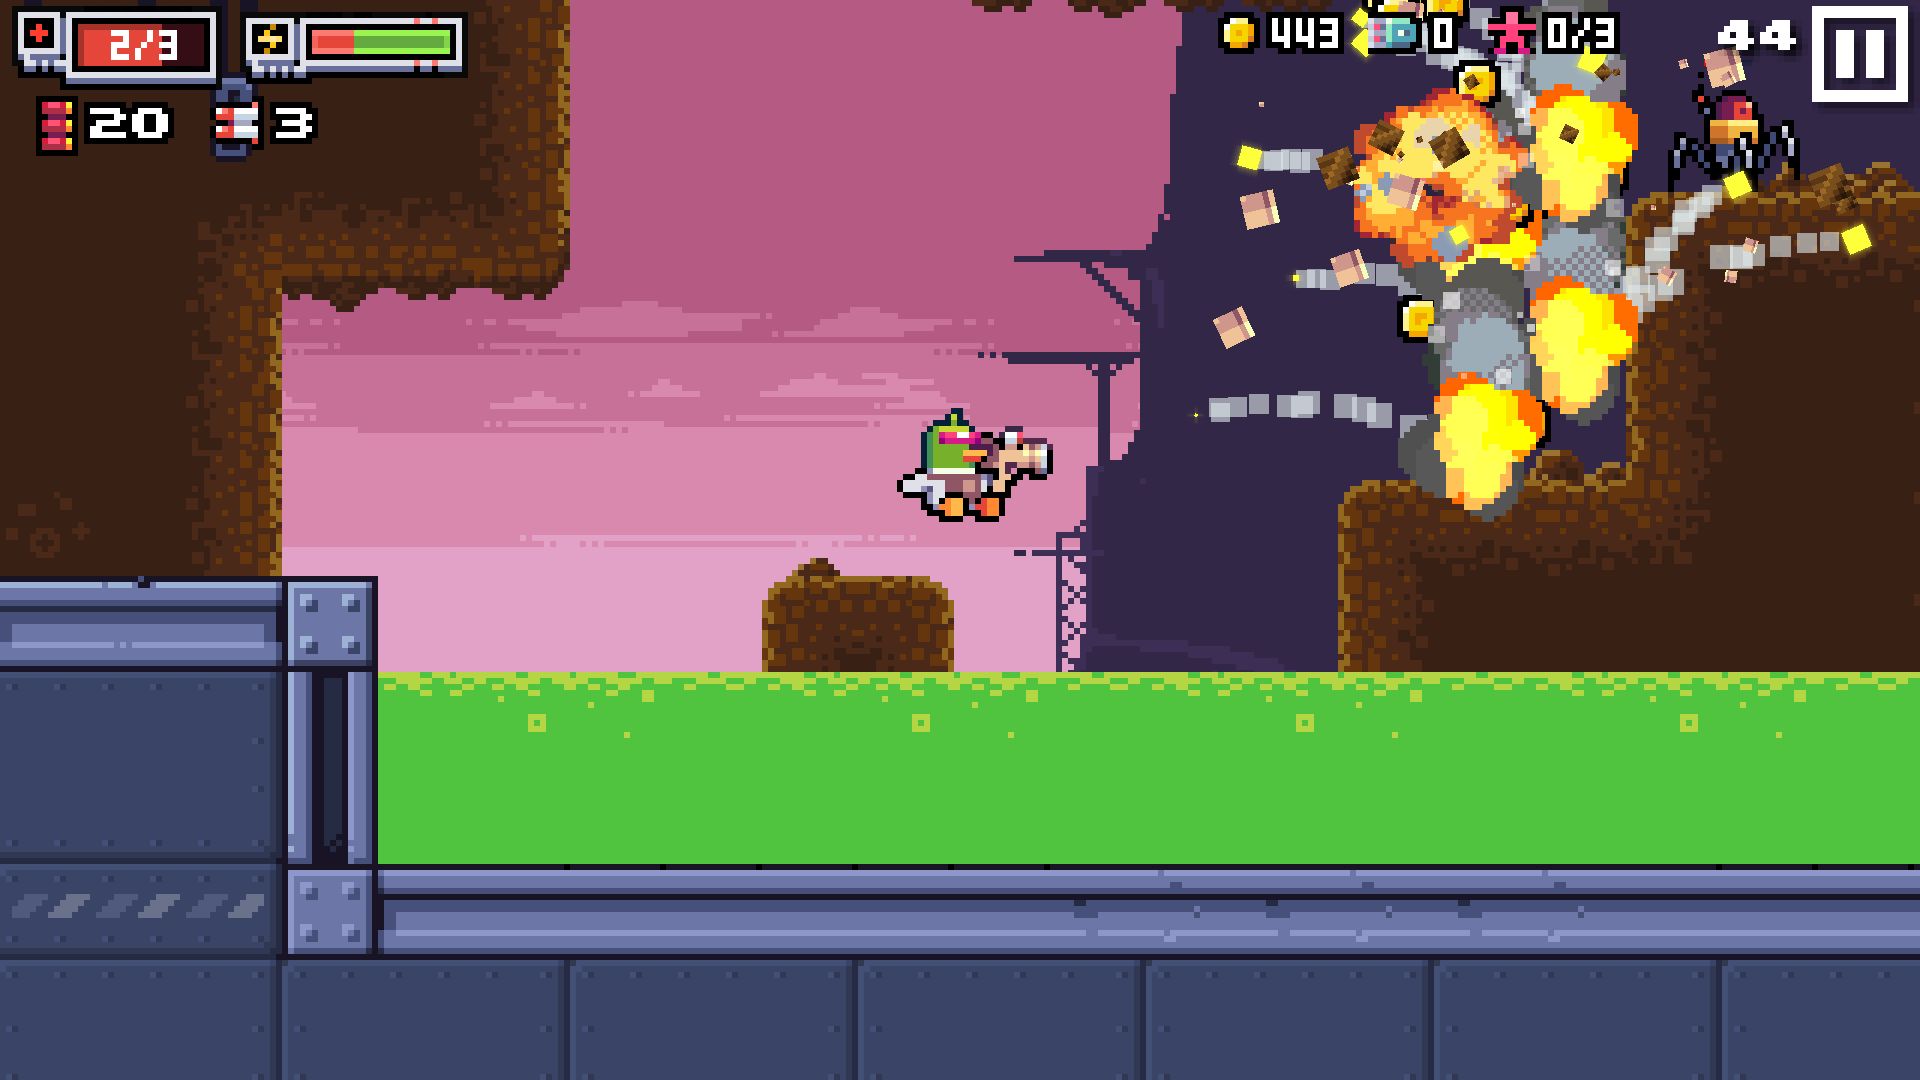 Special Agent CyberDuck - Android game screenshots.